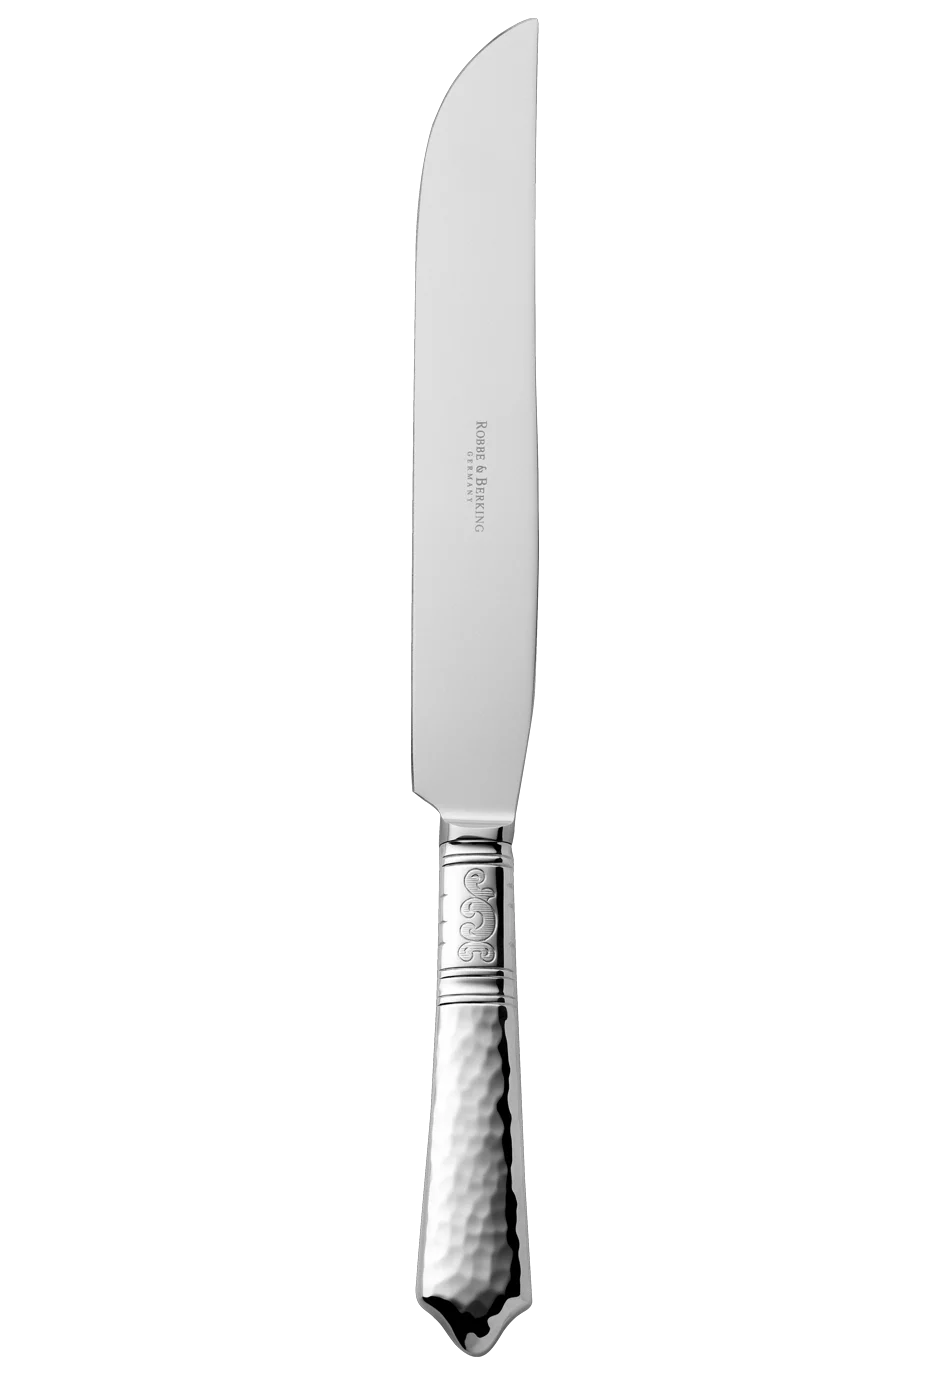 Hermitage Carving Knife (150g massive silverplated)